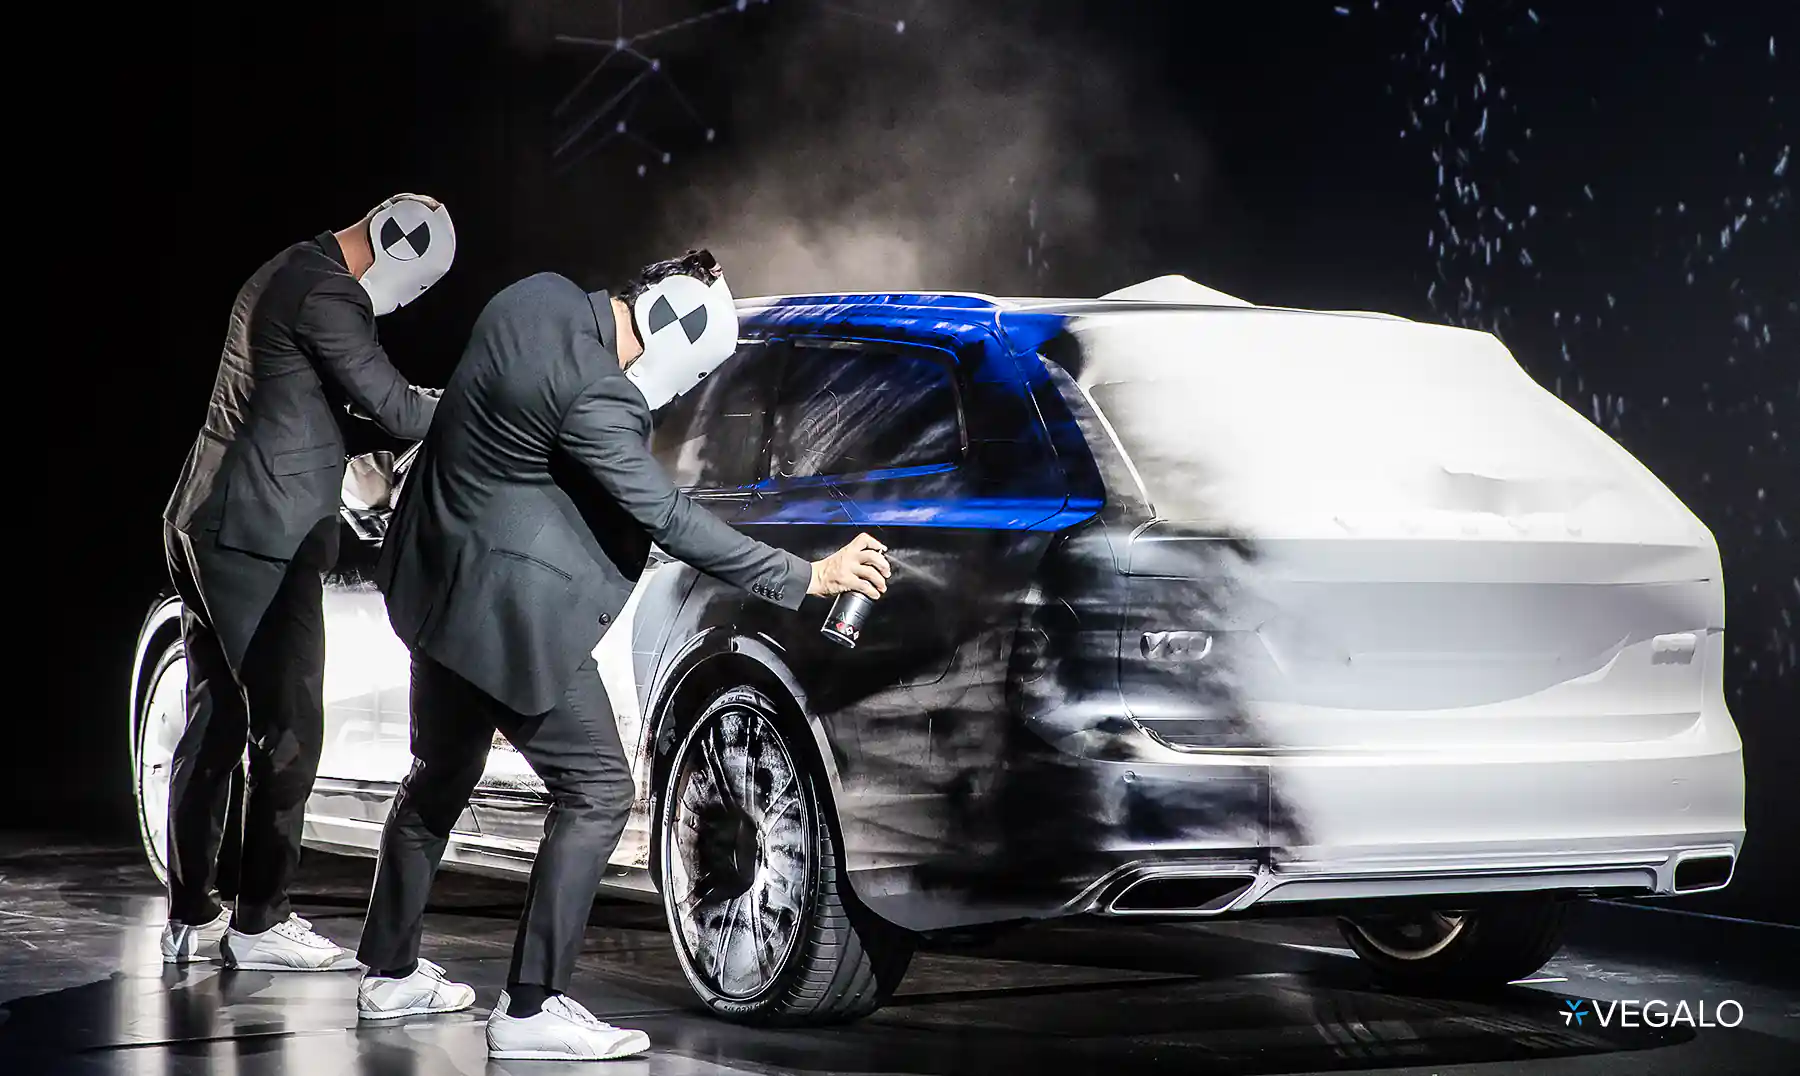 An event photo taken for the Volvo Art Session in Zurich of two men on stage, dressed in costume and spray painting a car.